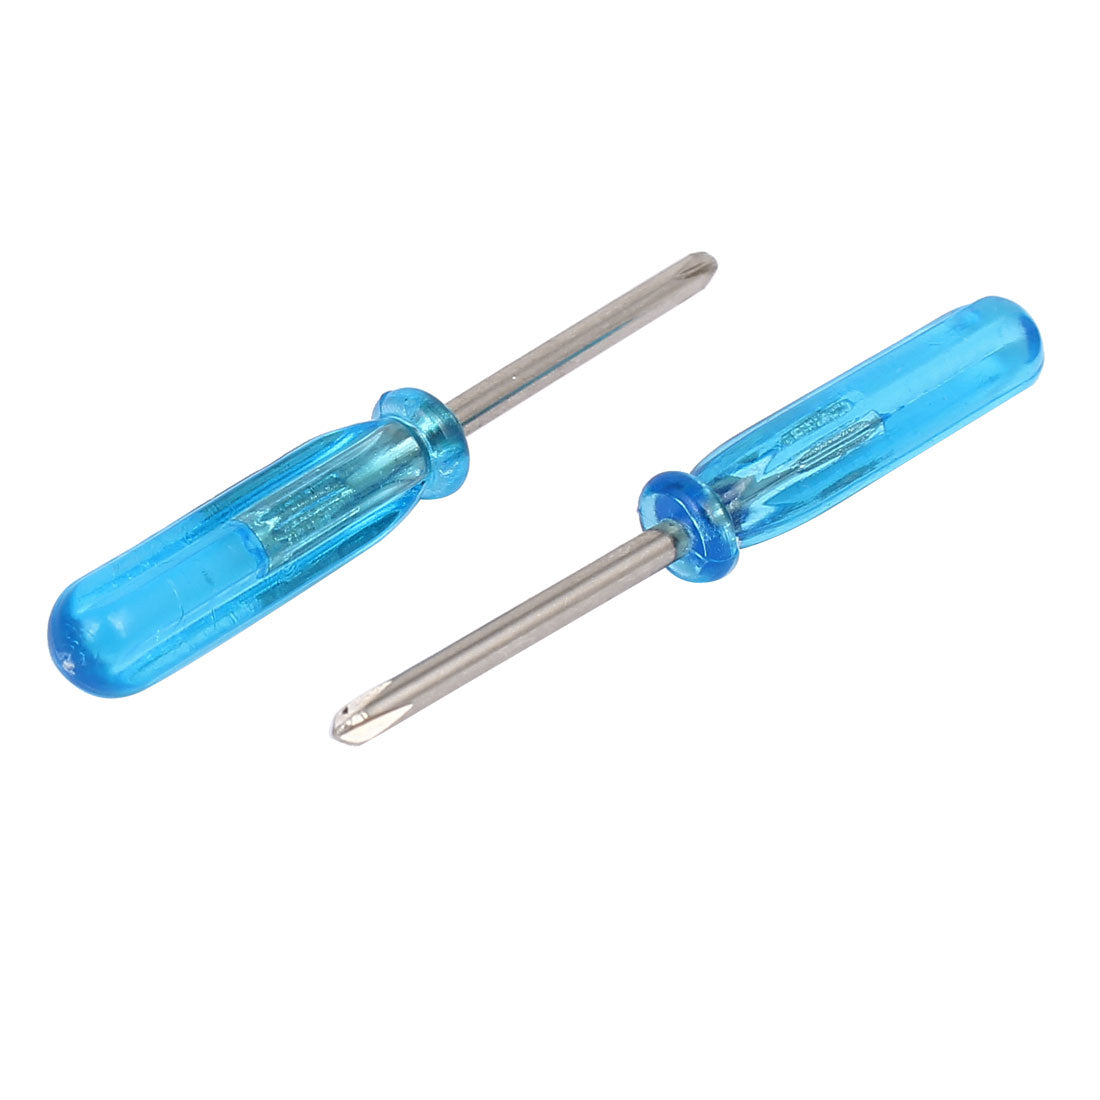 uxcell Uxcell 2mm Tip Plastic Handle Phillips Screwdrivers Driver Repairing Tool Blue 100pcs